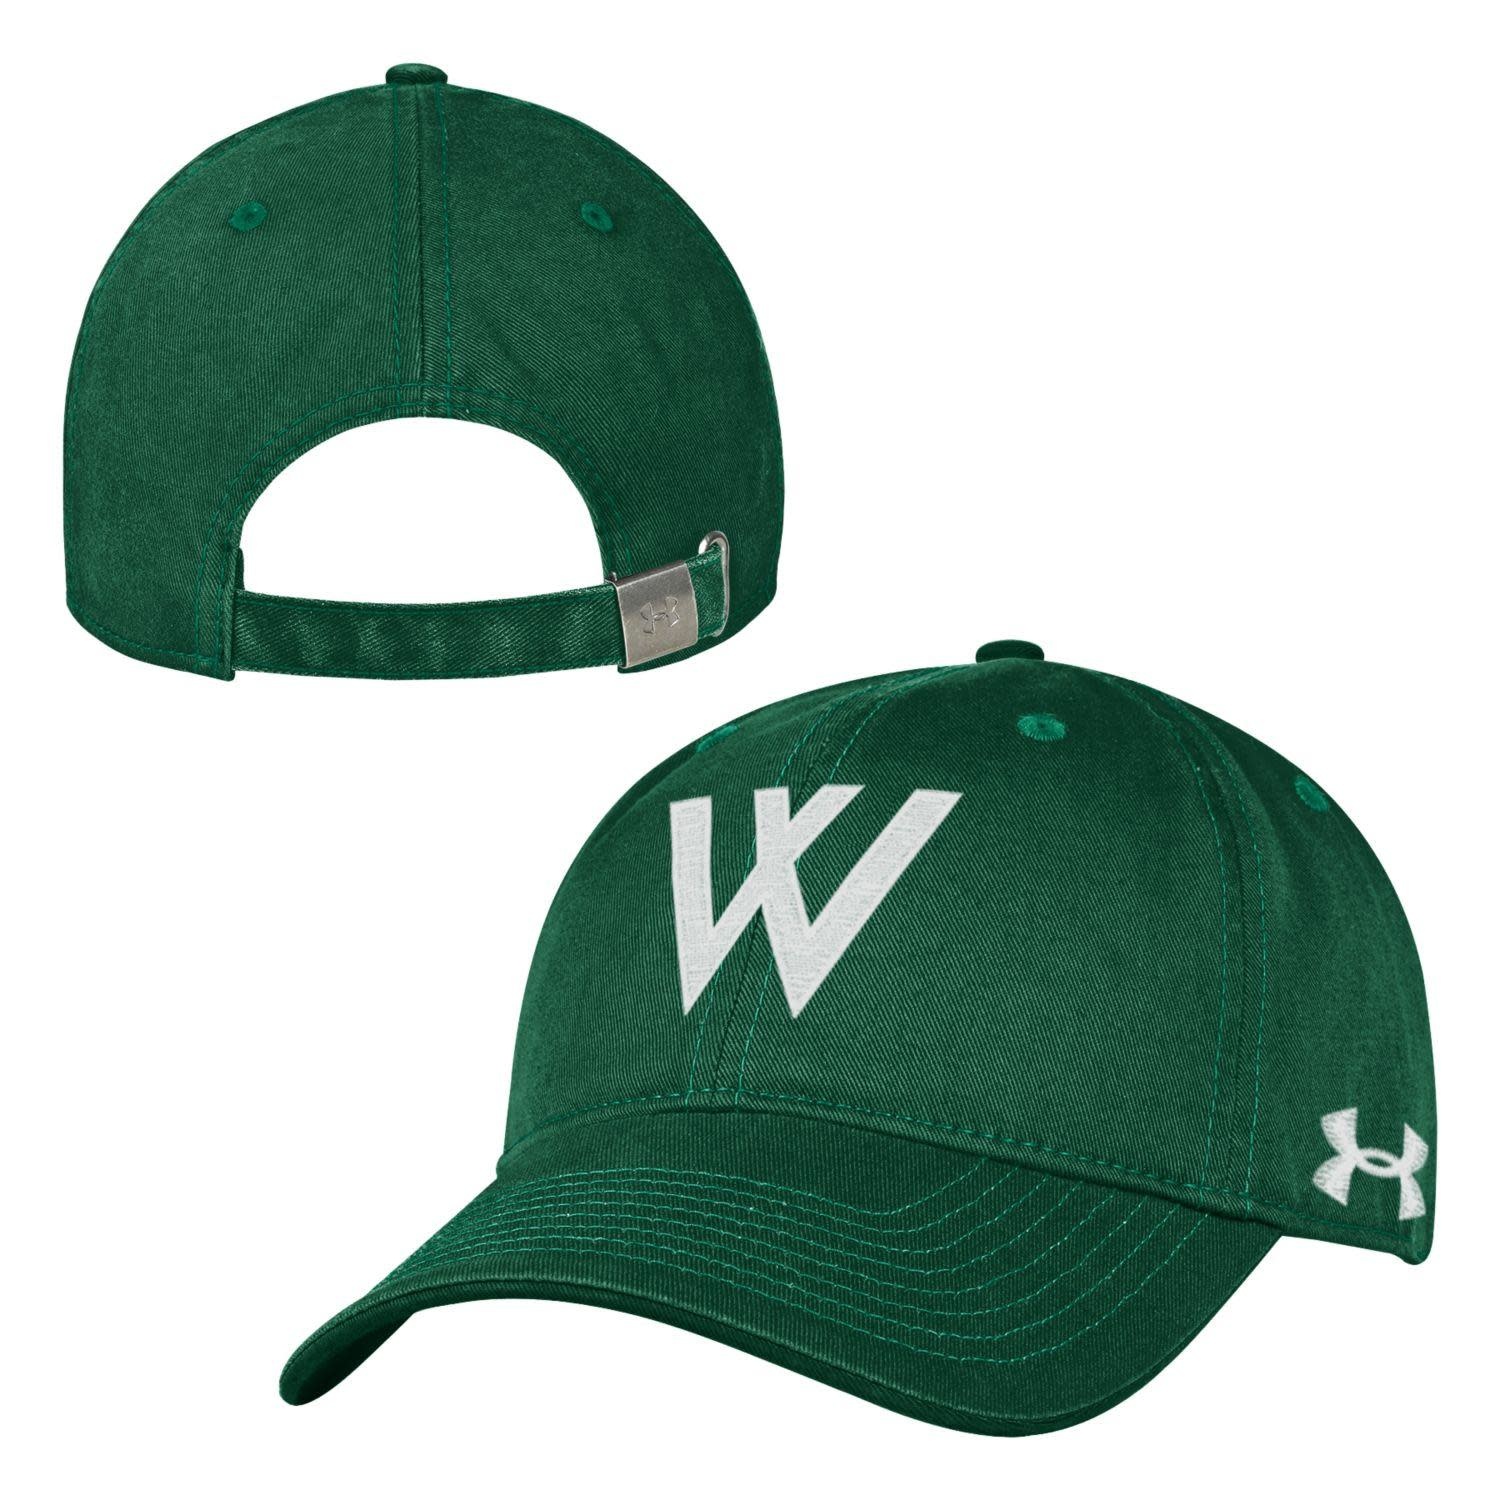 Under Armour Hat: Westminster